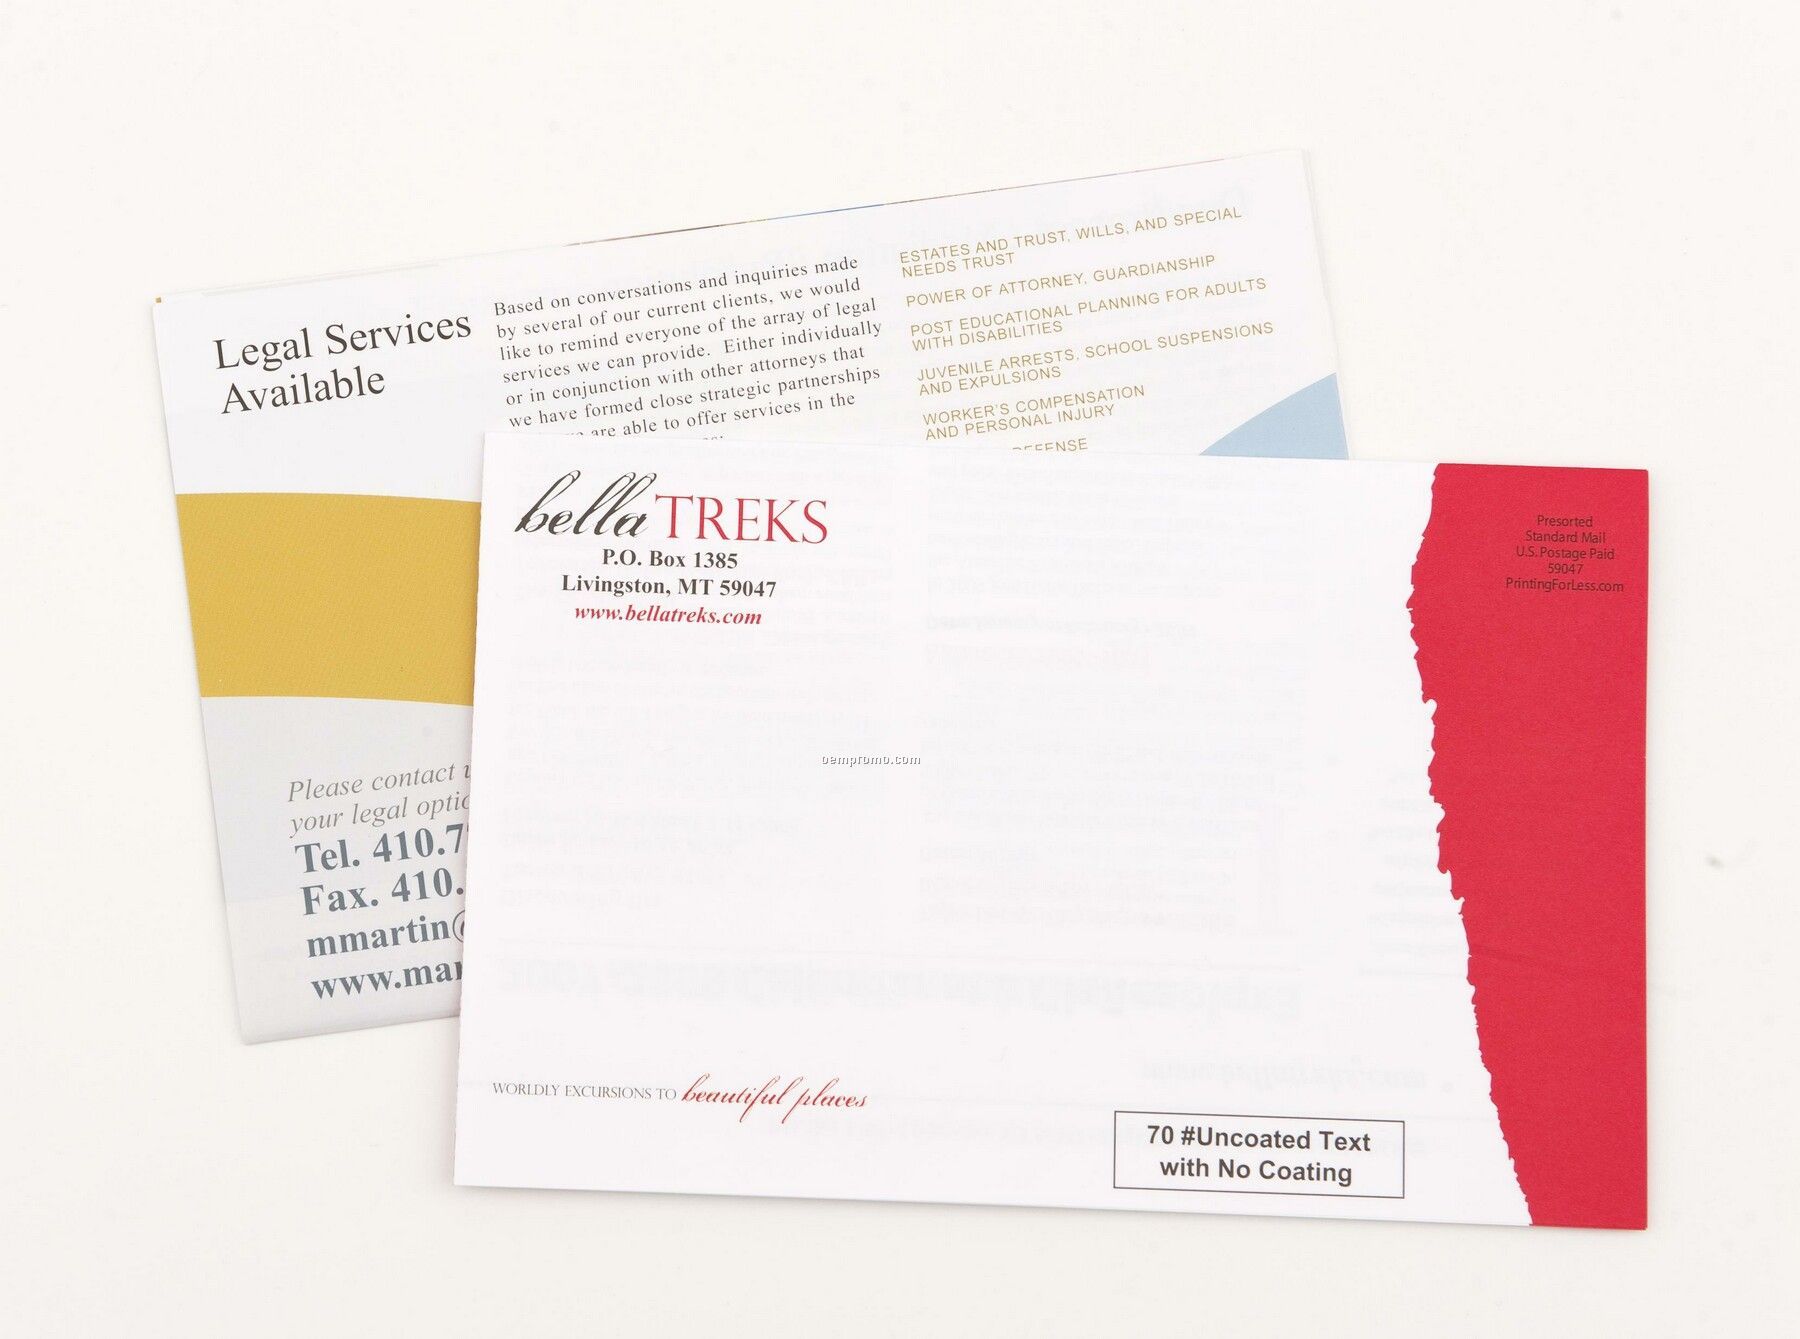 Newsletter - 70 Lb. Uncoated Text/ 11"X25.5" (Full Color/ Black)